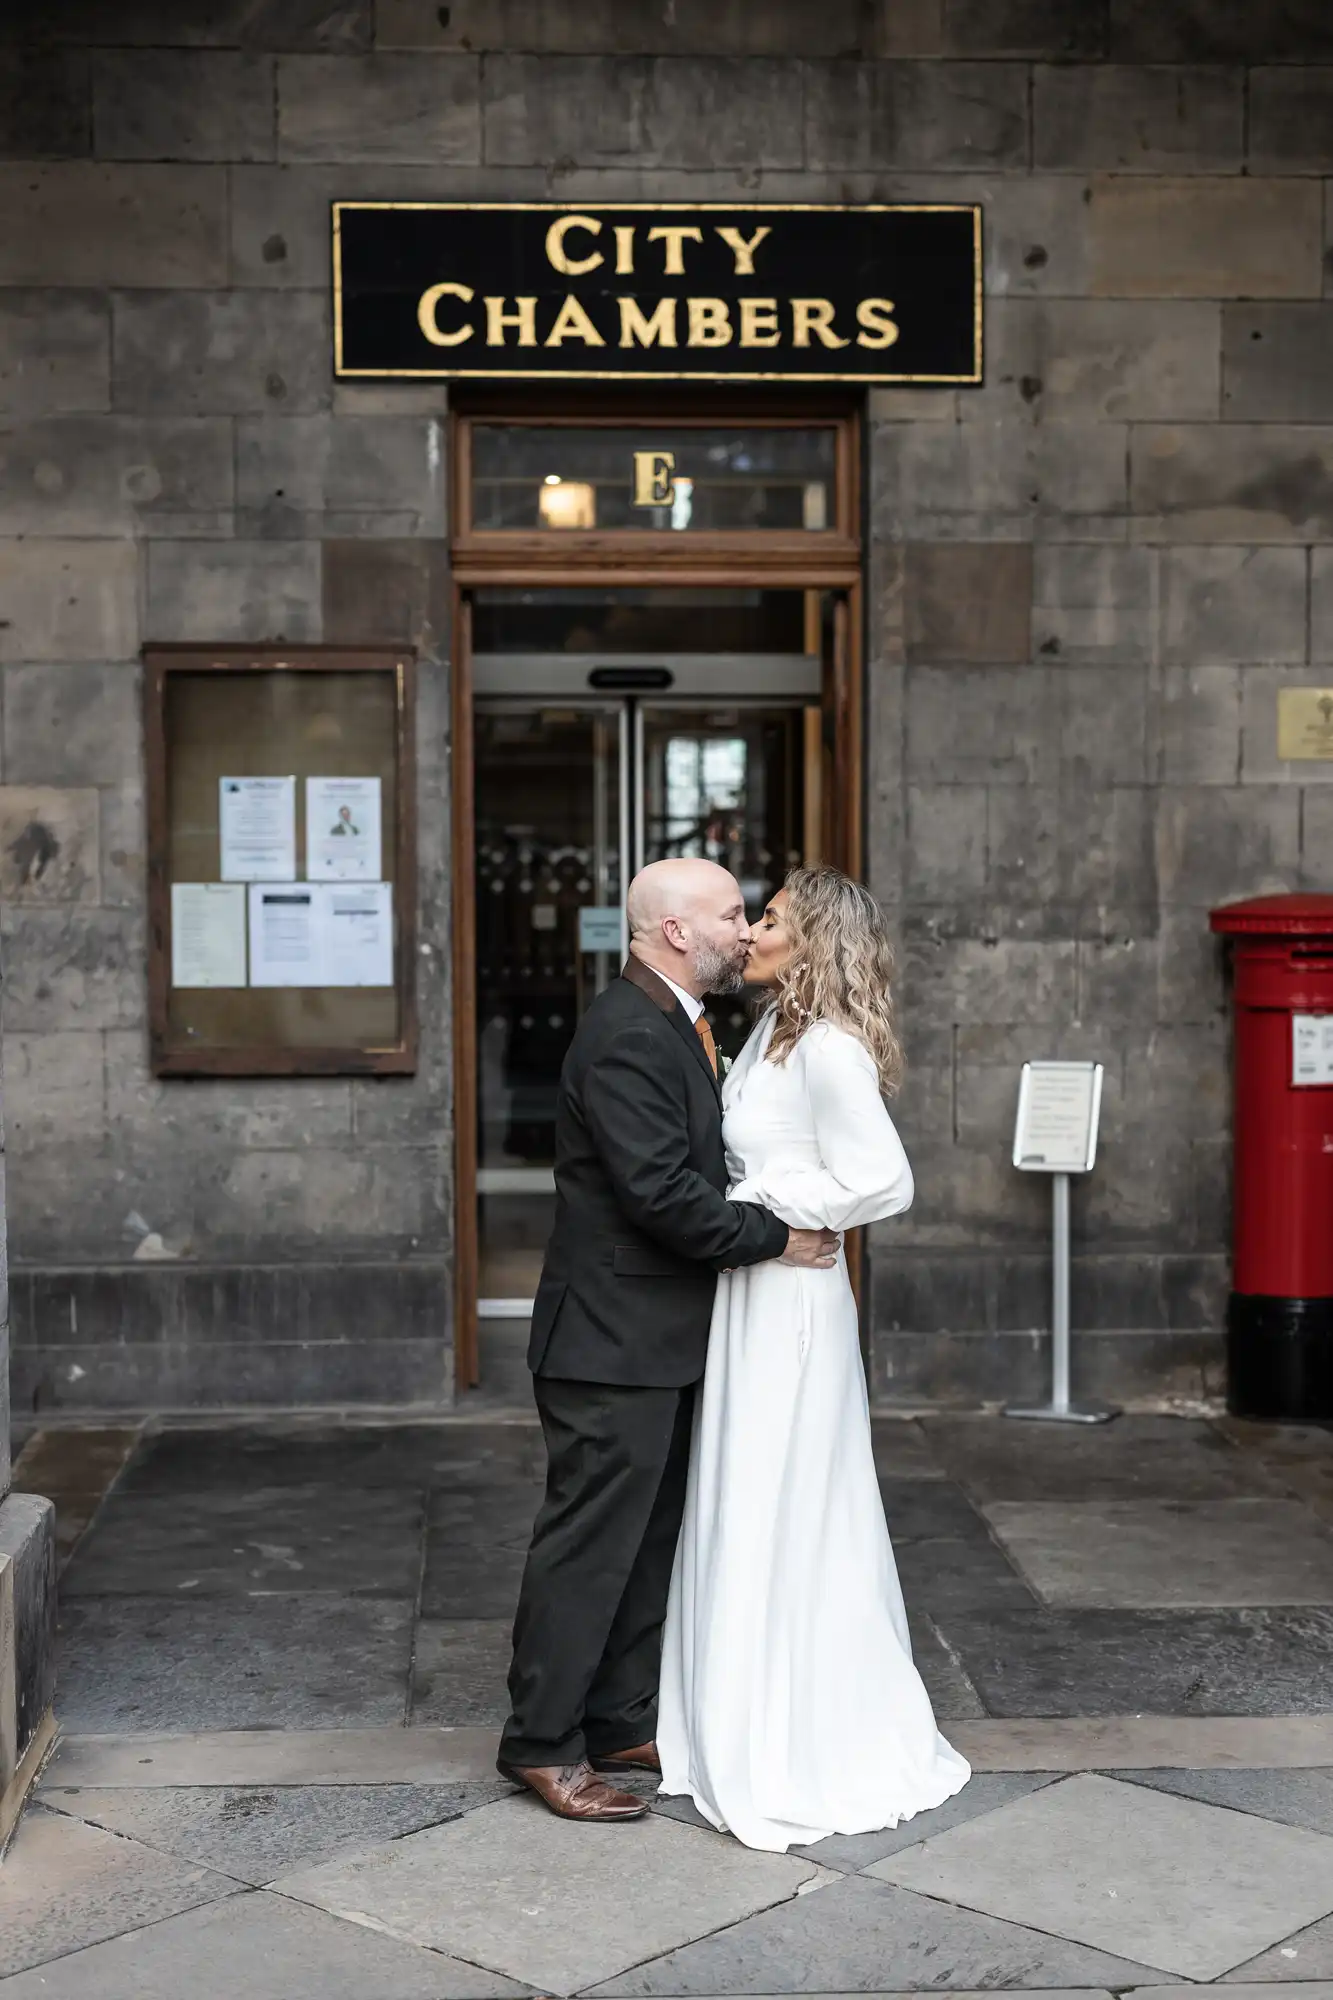 A couple in wedding attire shares a kiss in front of City Chambers.